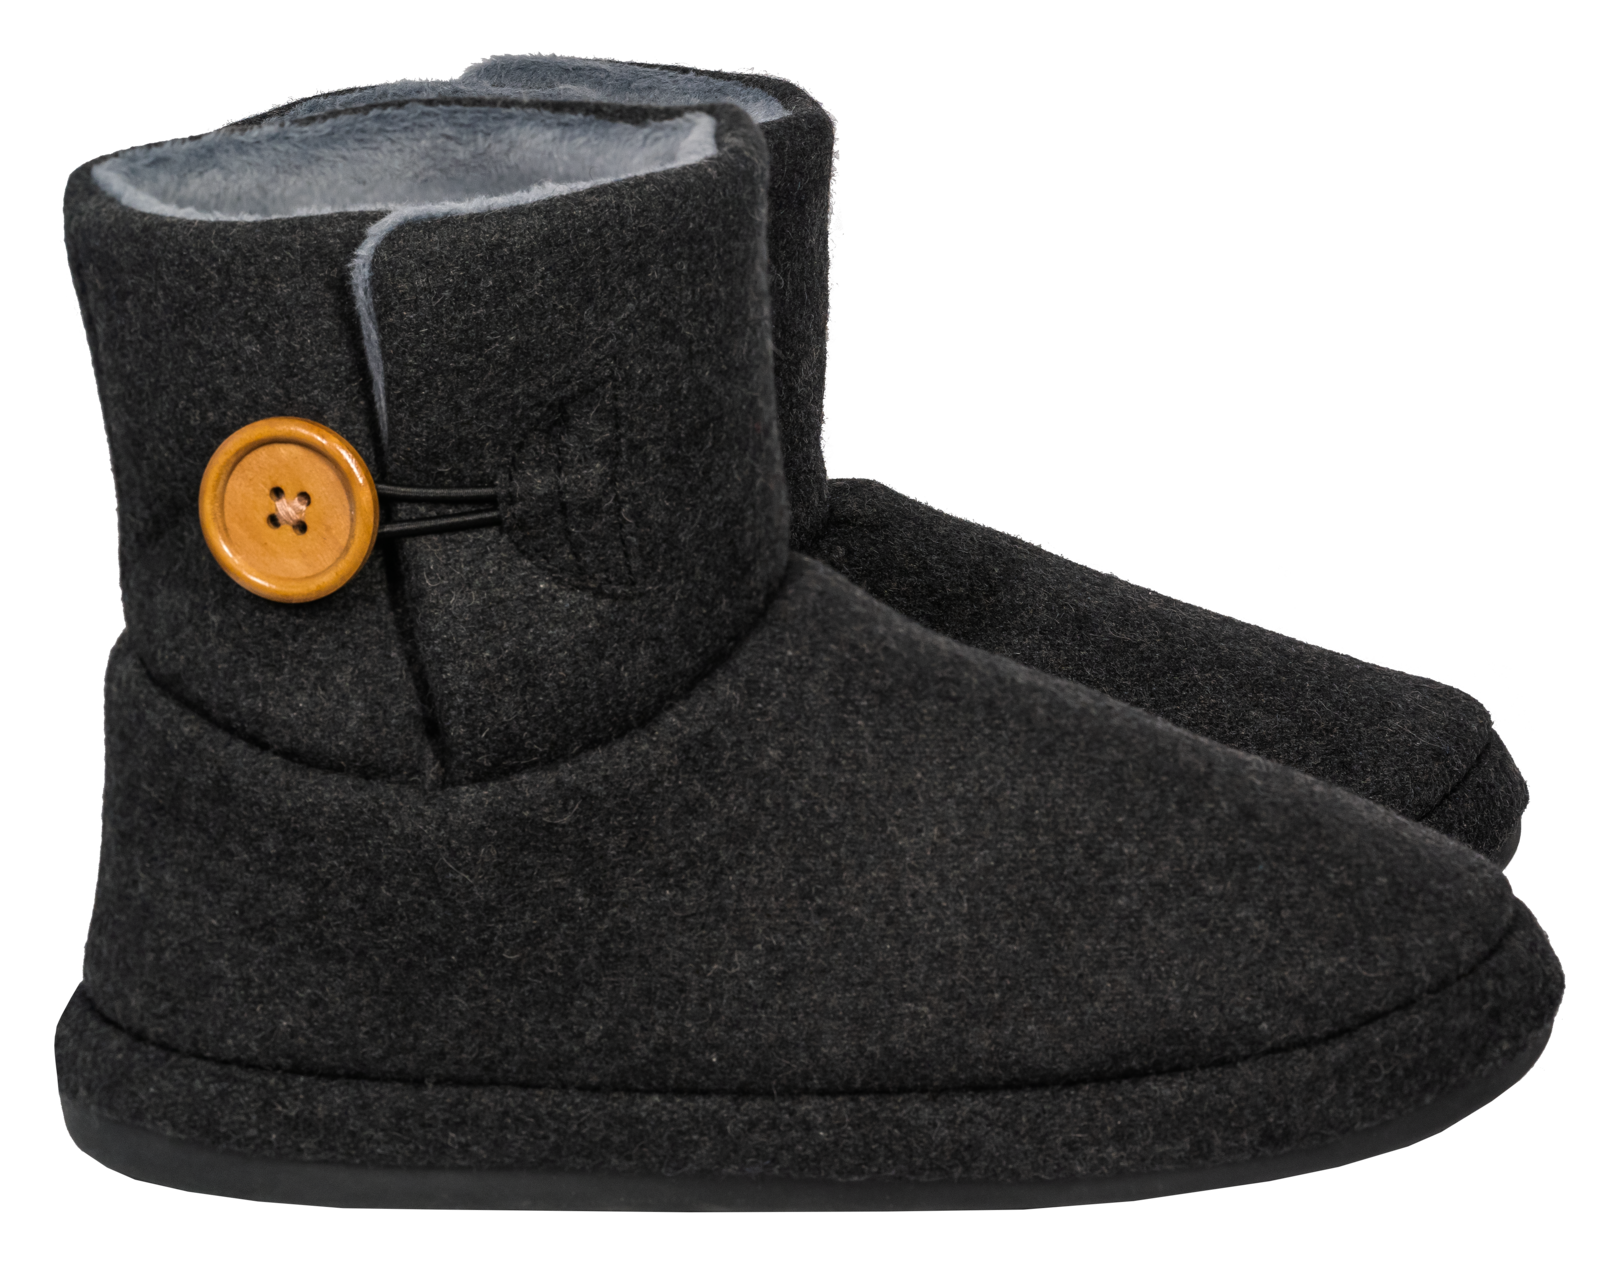 ugg boots arch support